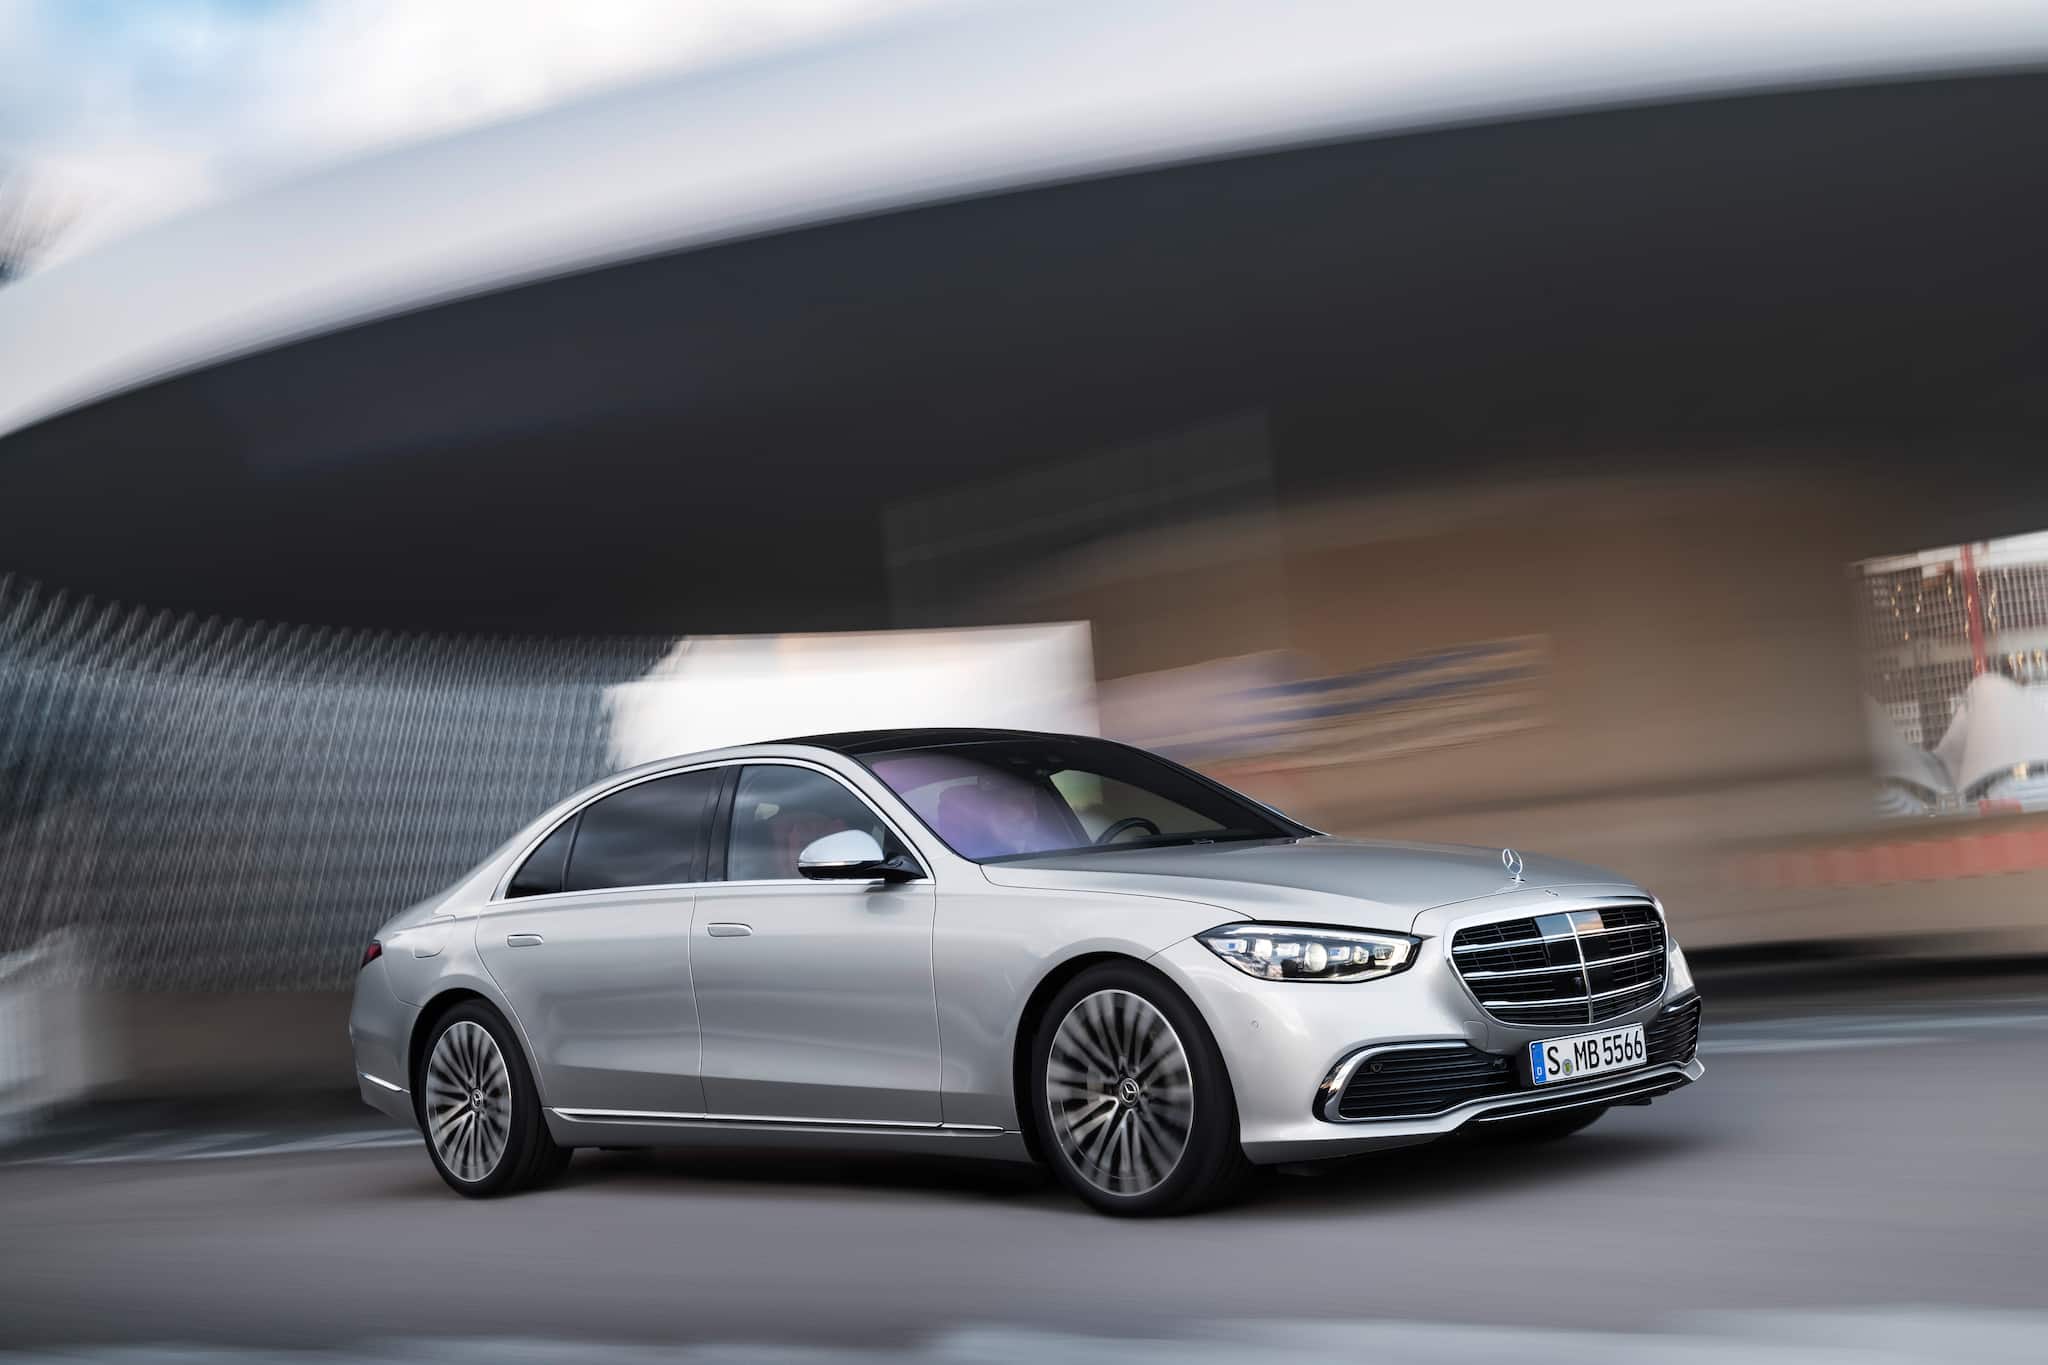 The Drive Report | Mercedes-Benz S-Class S 350d: A masterclass in comfort, poise and refinement